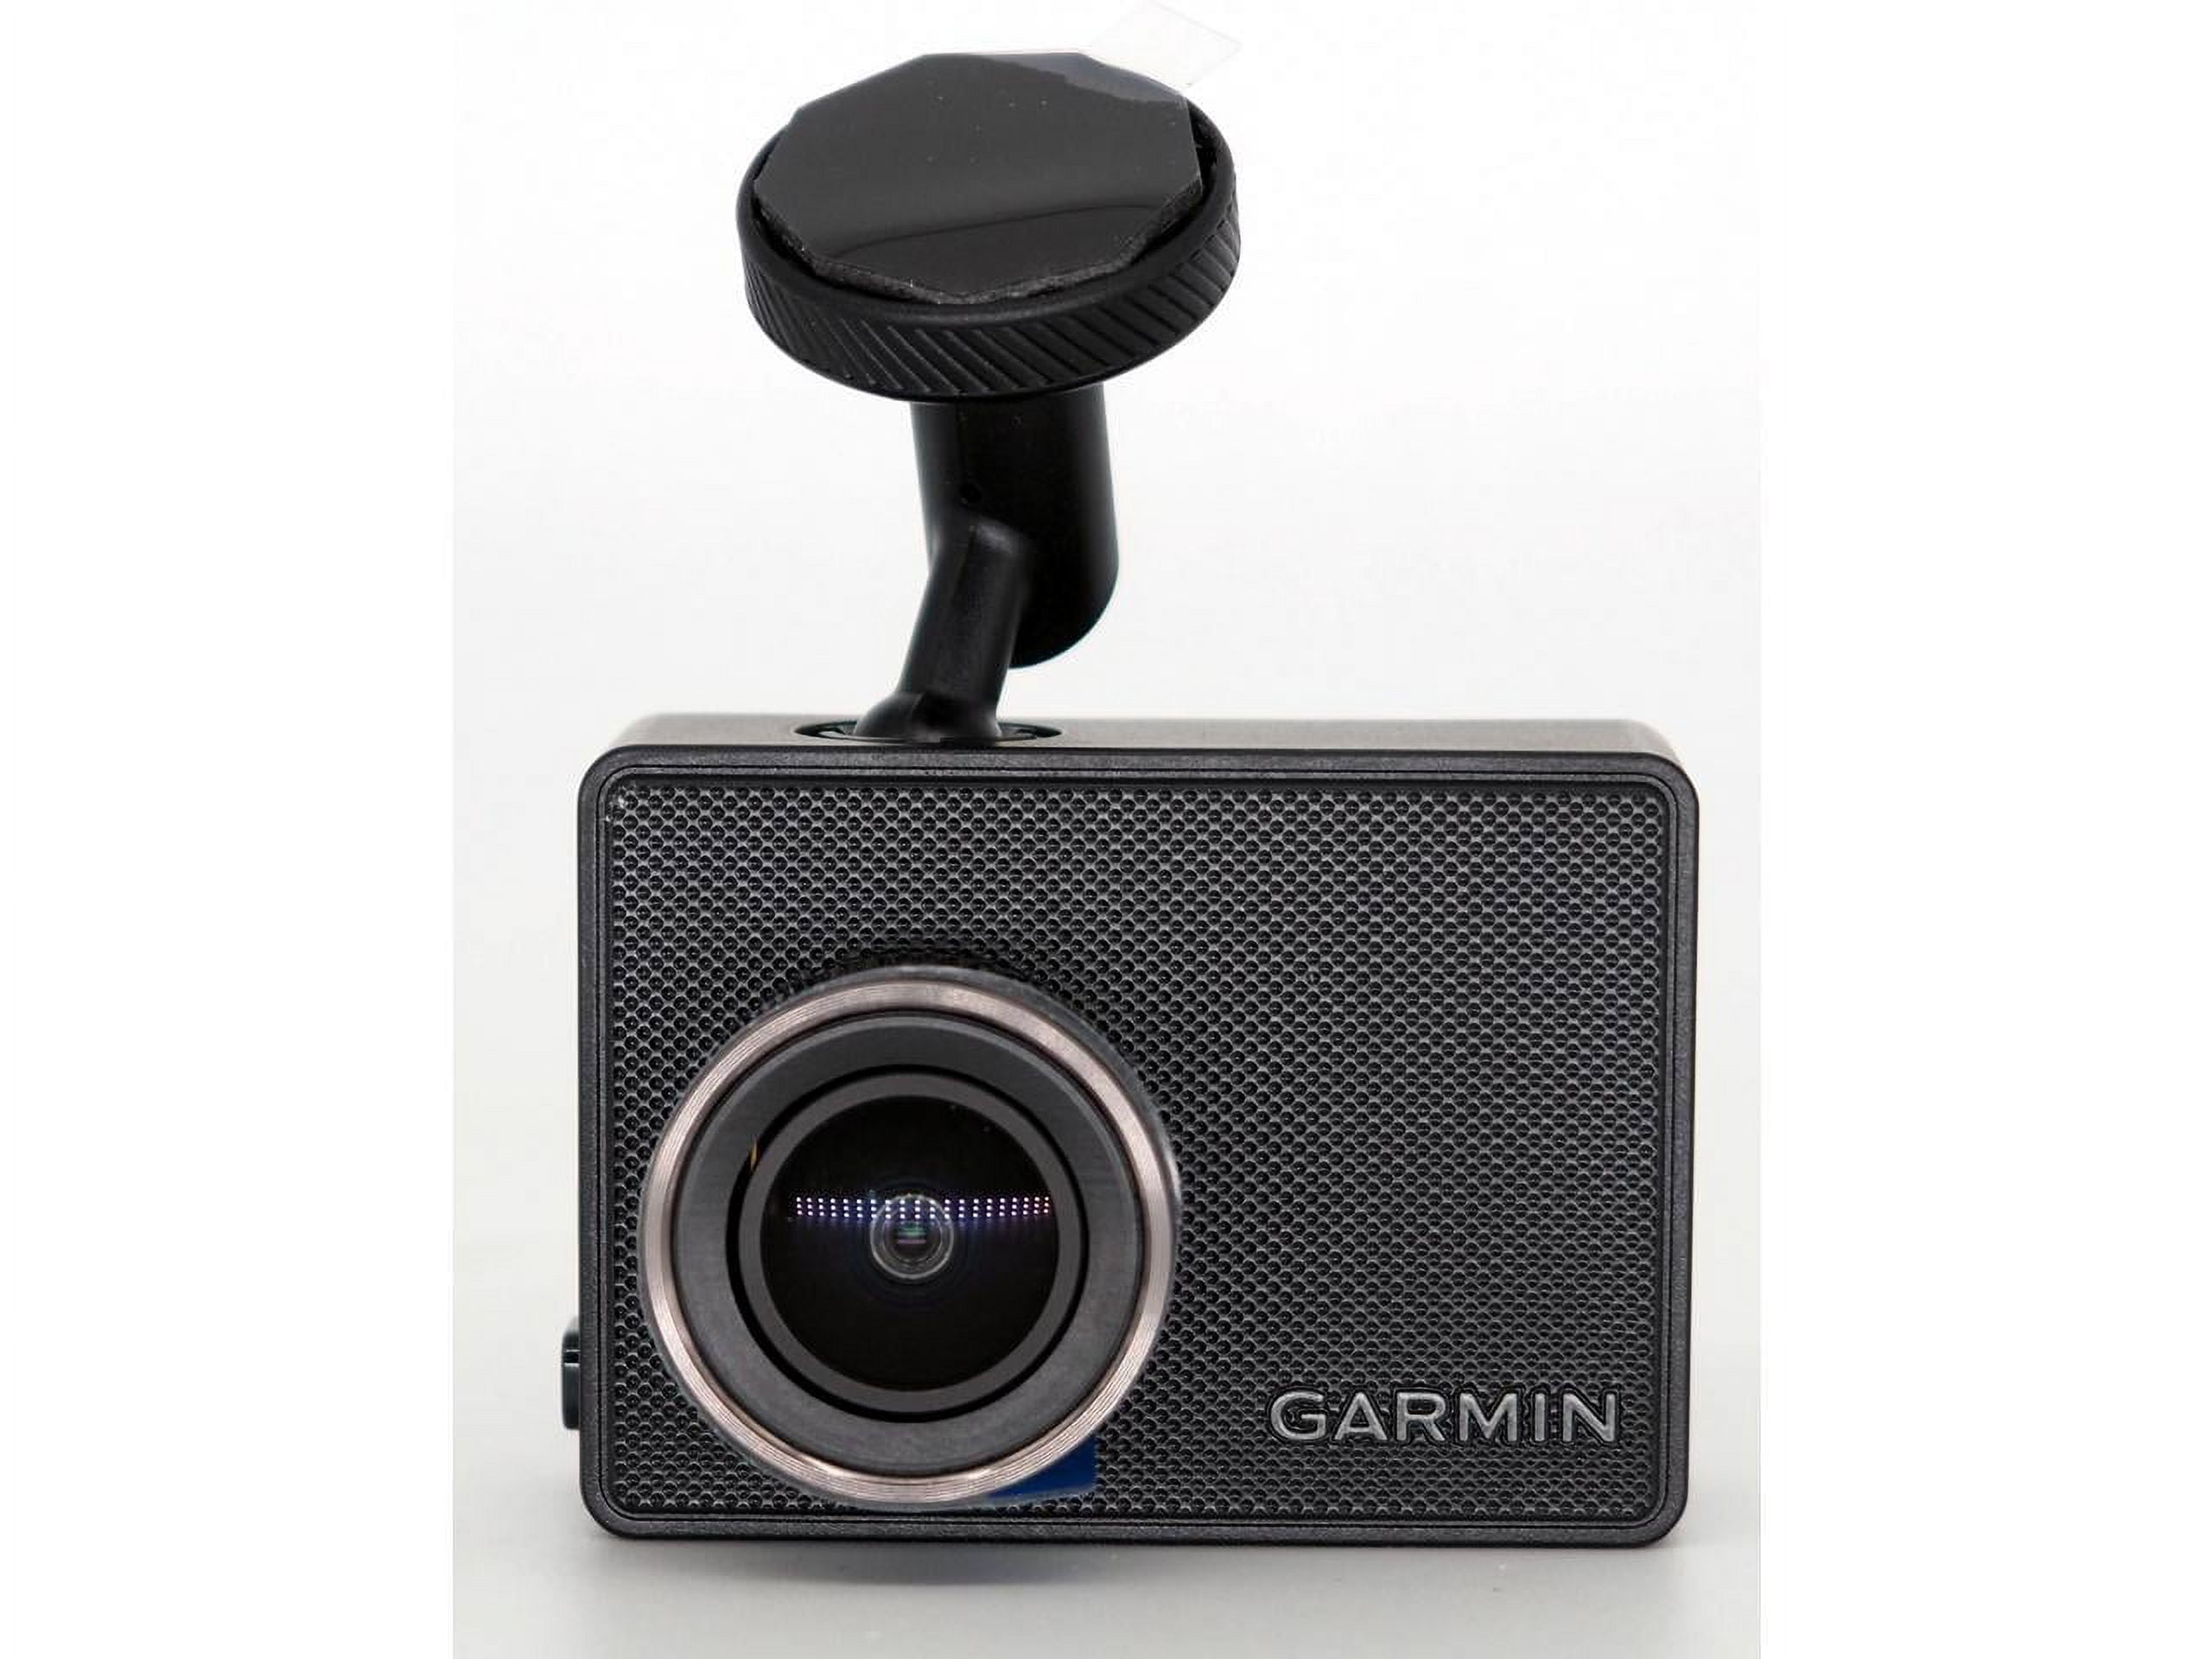  Garmin Dash Cam 47, 1080p and 140-degree FOV, Monitor Your  Vehicle While Away w/ New Connected Features, Voice Control, Compact and  Discreet, Includes Memory Card : Electronics